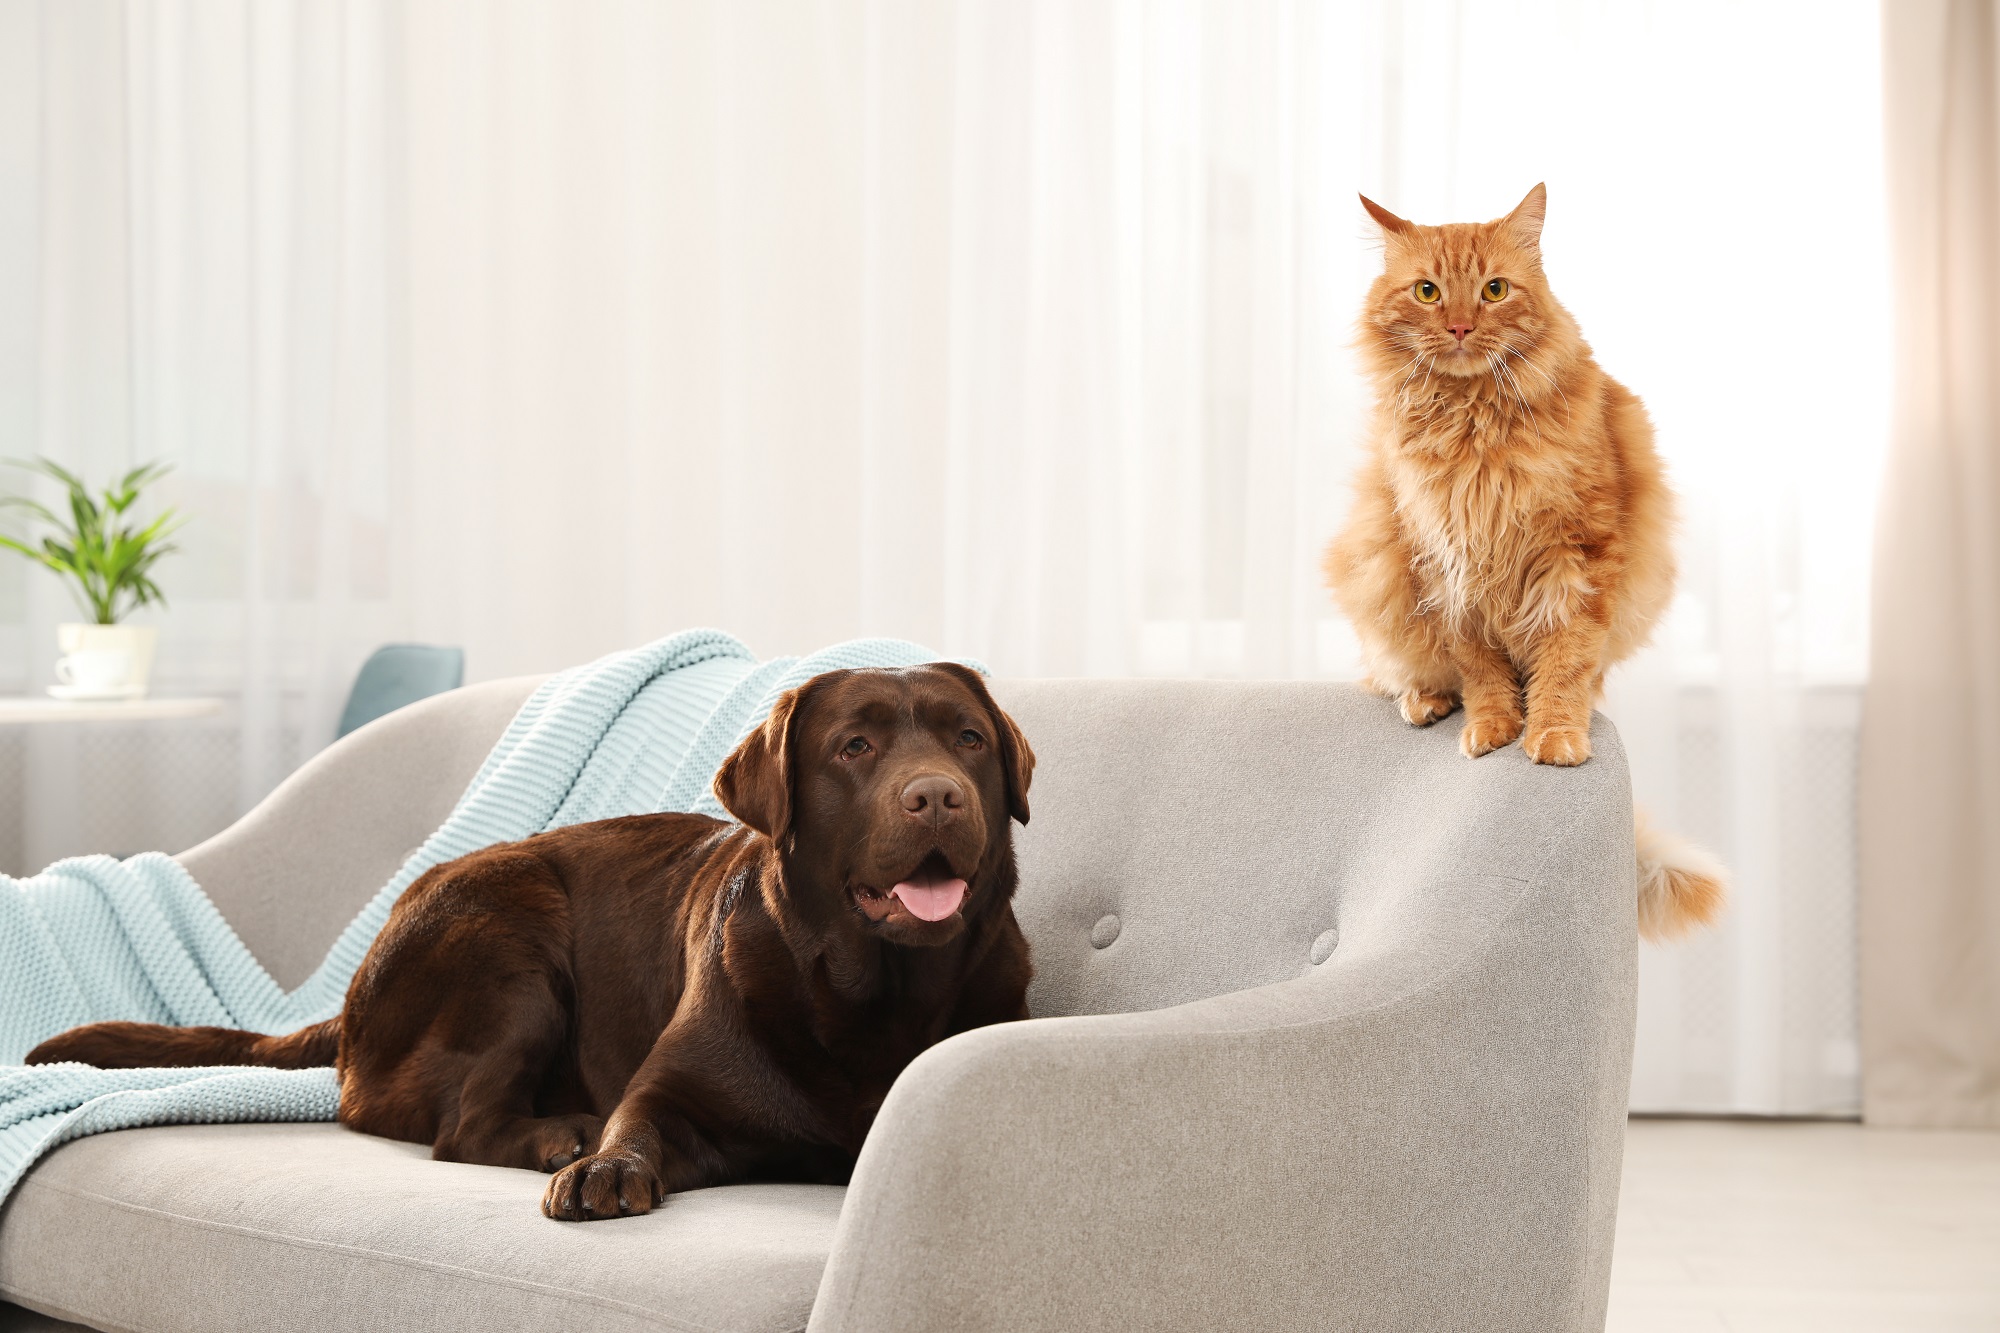 Image shows a cat and dog on a sofa